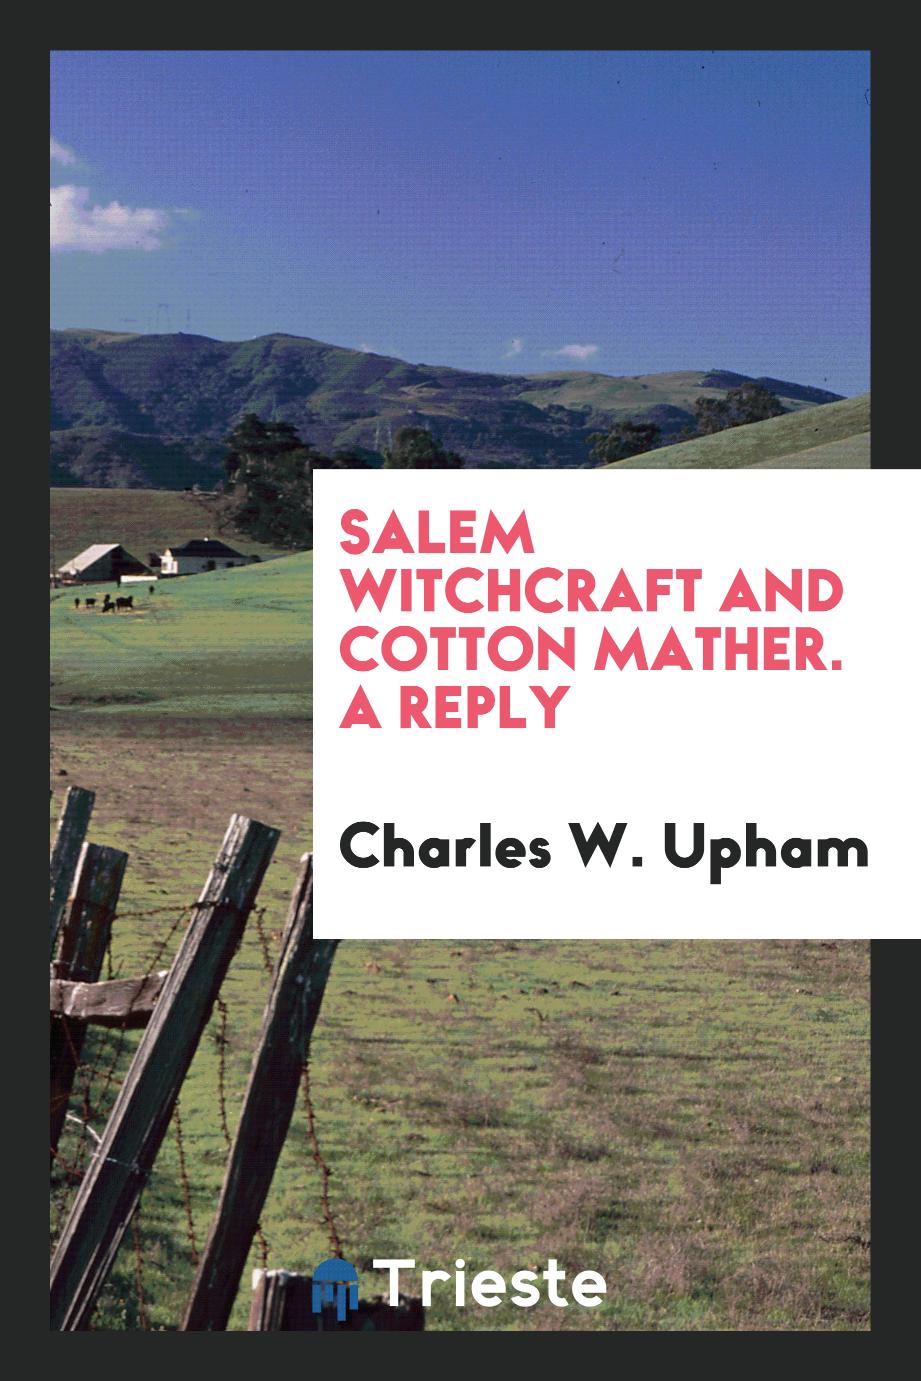 Salem Witchcraft and Cotton Mather. A Reply